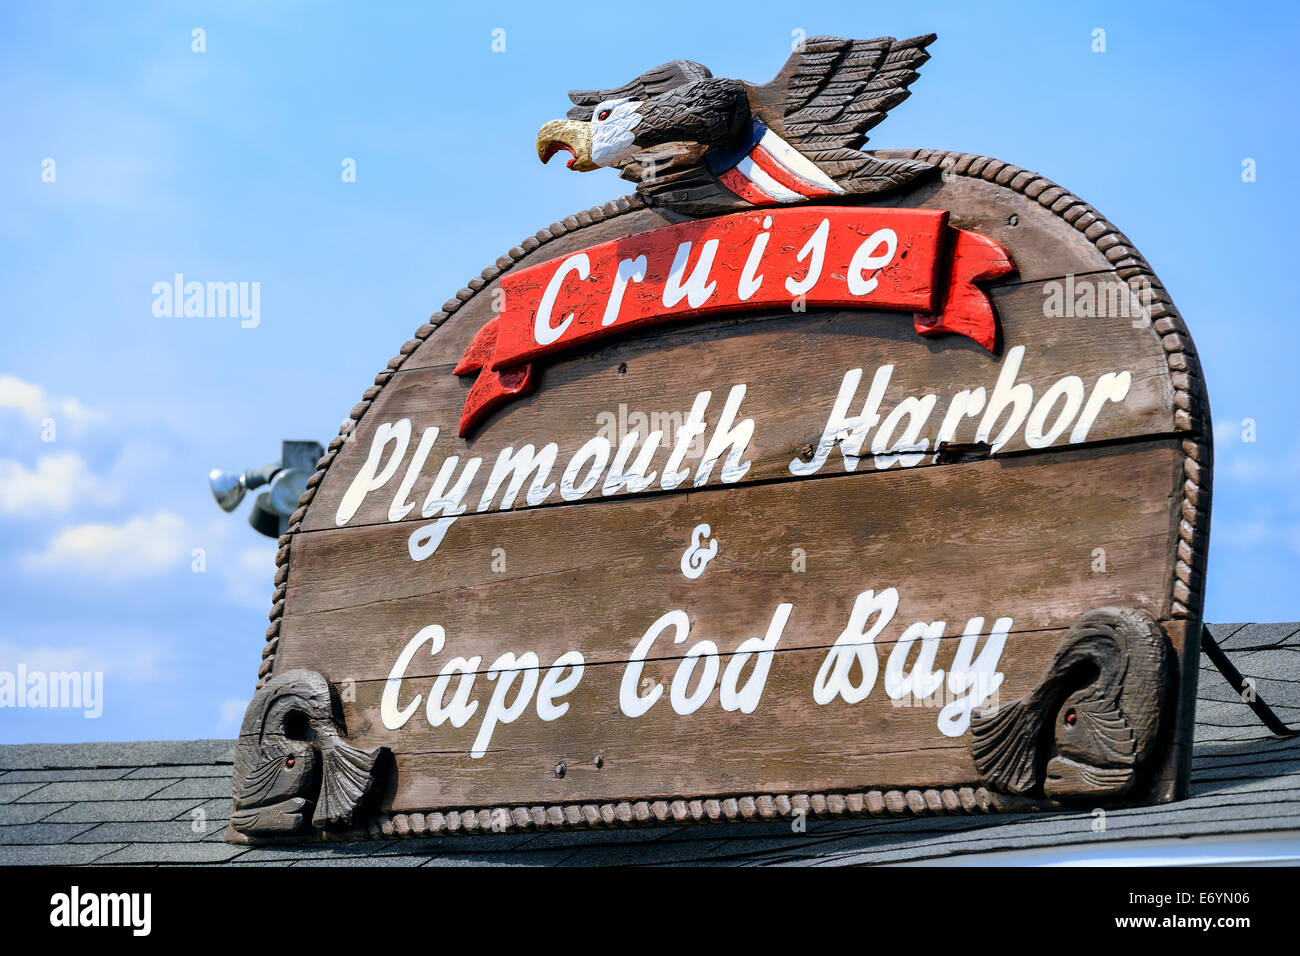 An ornate carved wooden sign for Cruises from Plymouth Harbor and Cape Cod Bay. Plymouth, Massachusetts - USA. Stock Photo